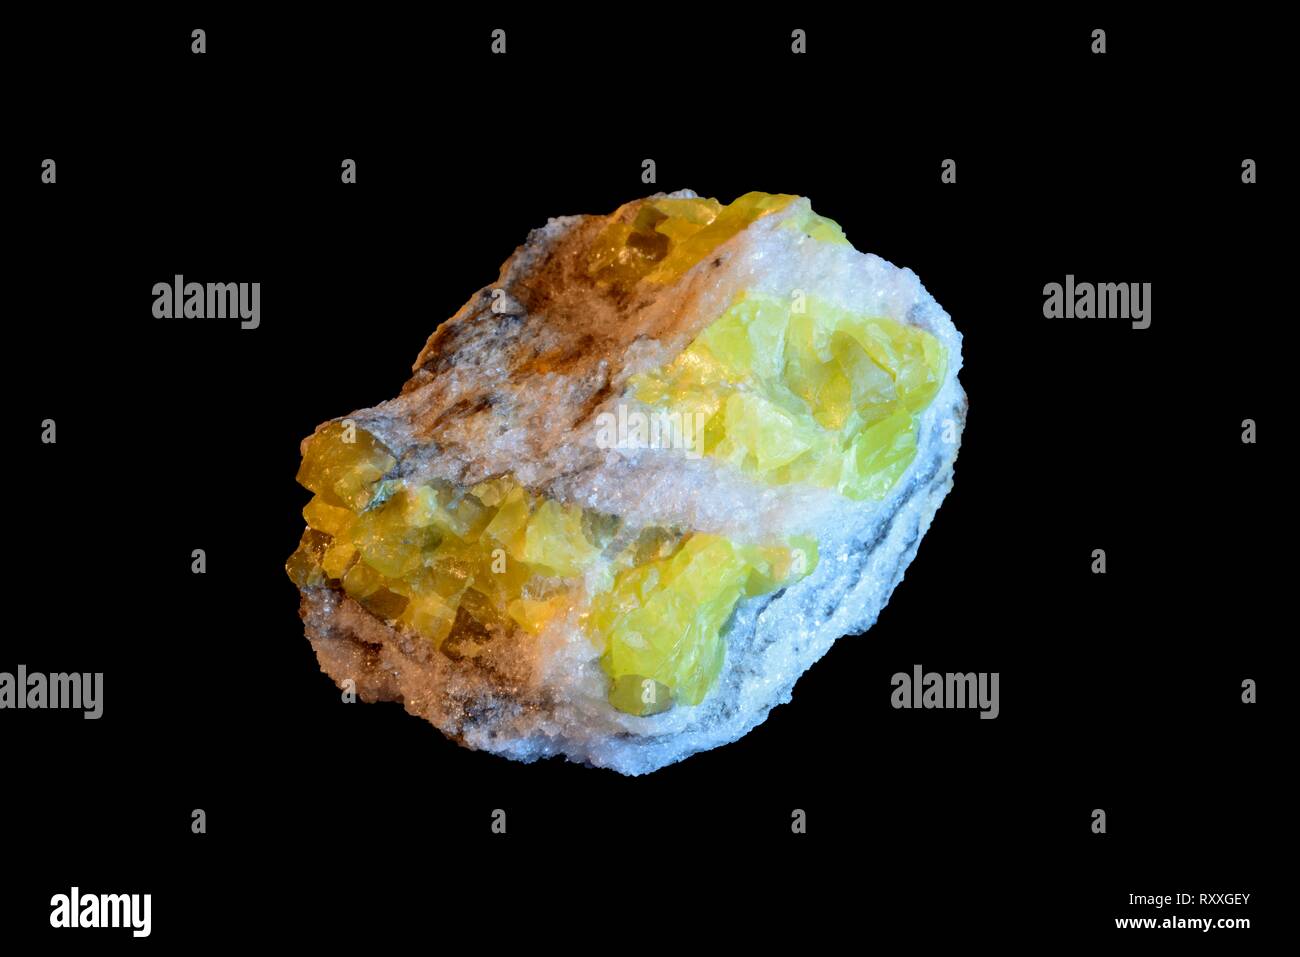 Rock with sulfur crystal, Germany Stock Photo